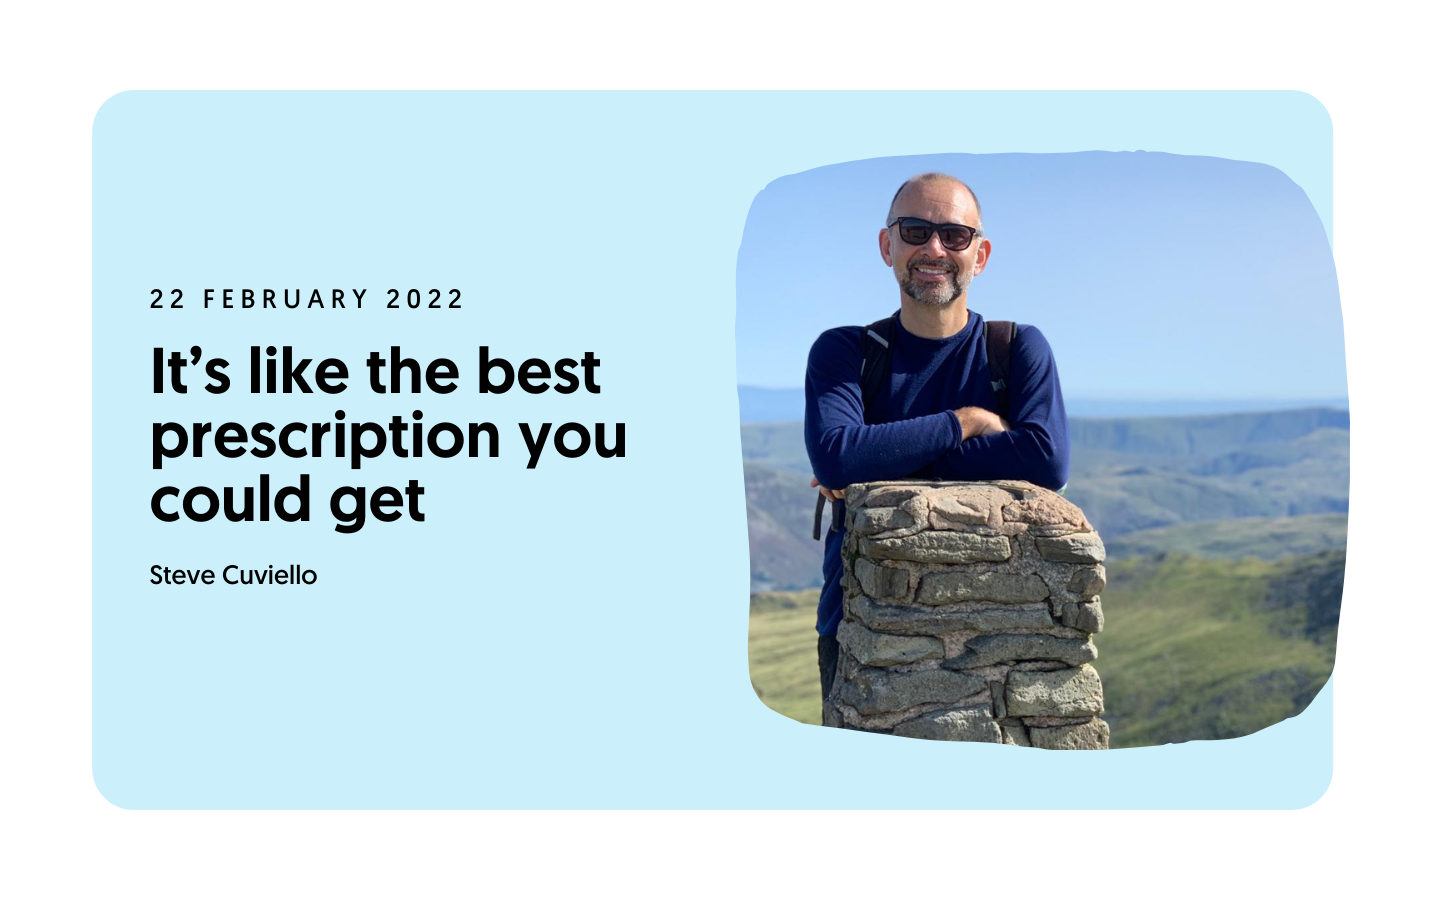 It’s like the best prescription you could get from a doctor—Steve Cuviello